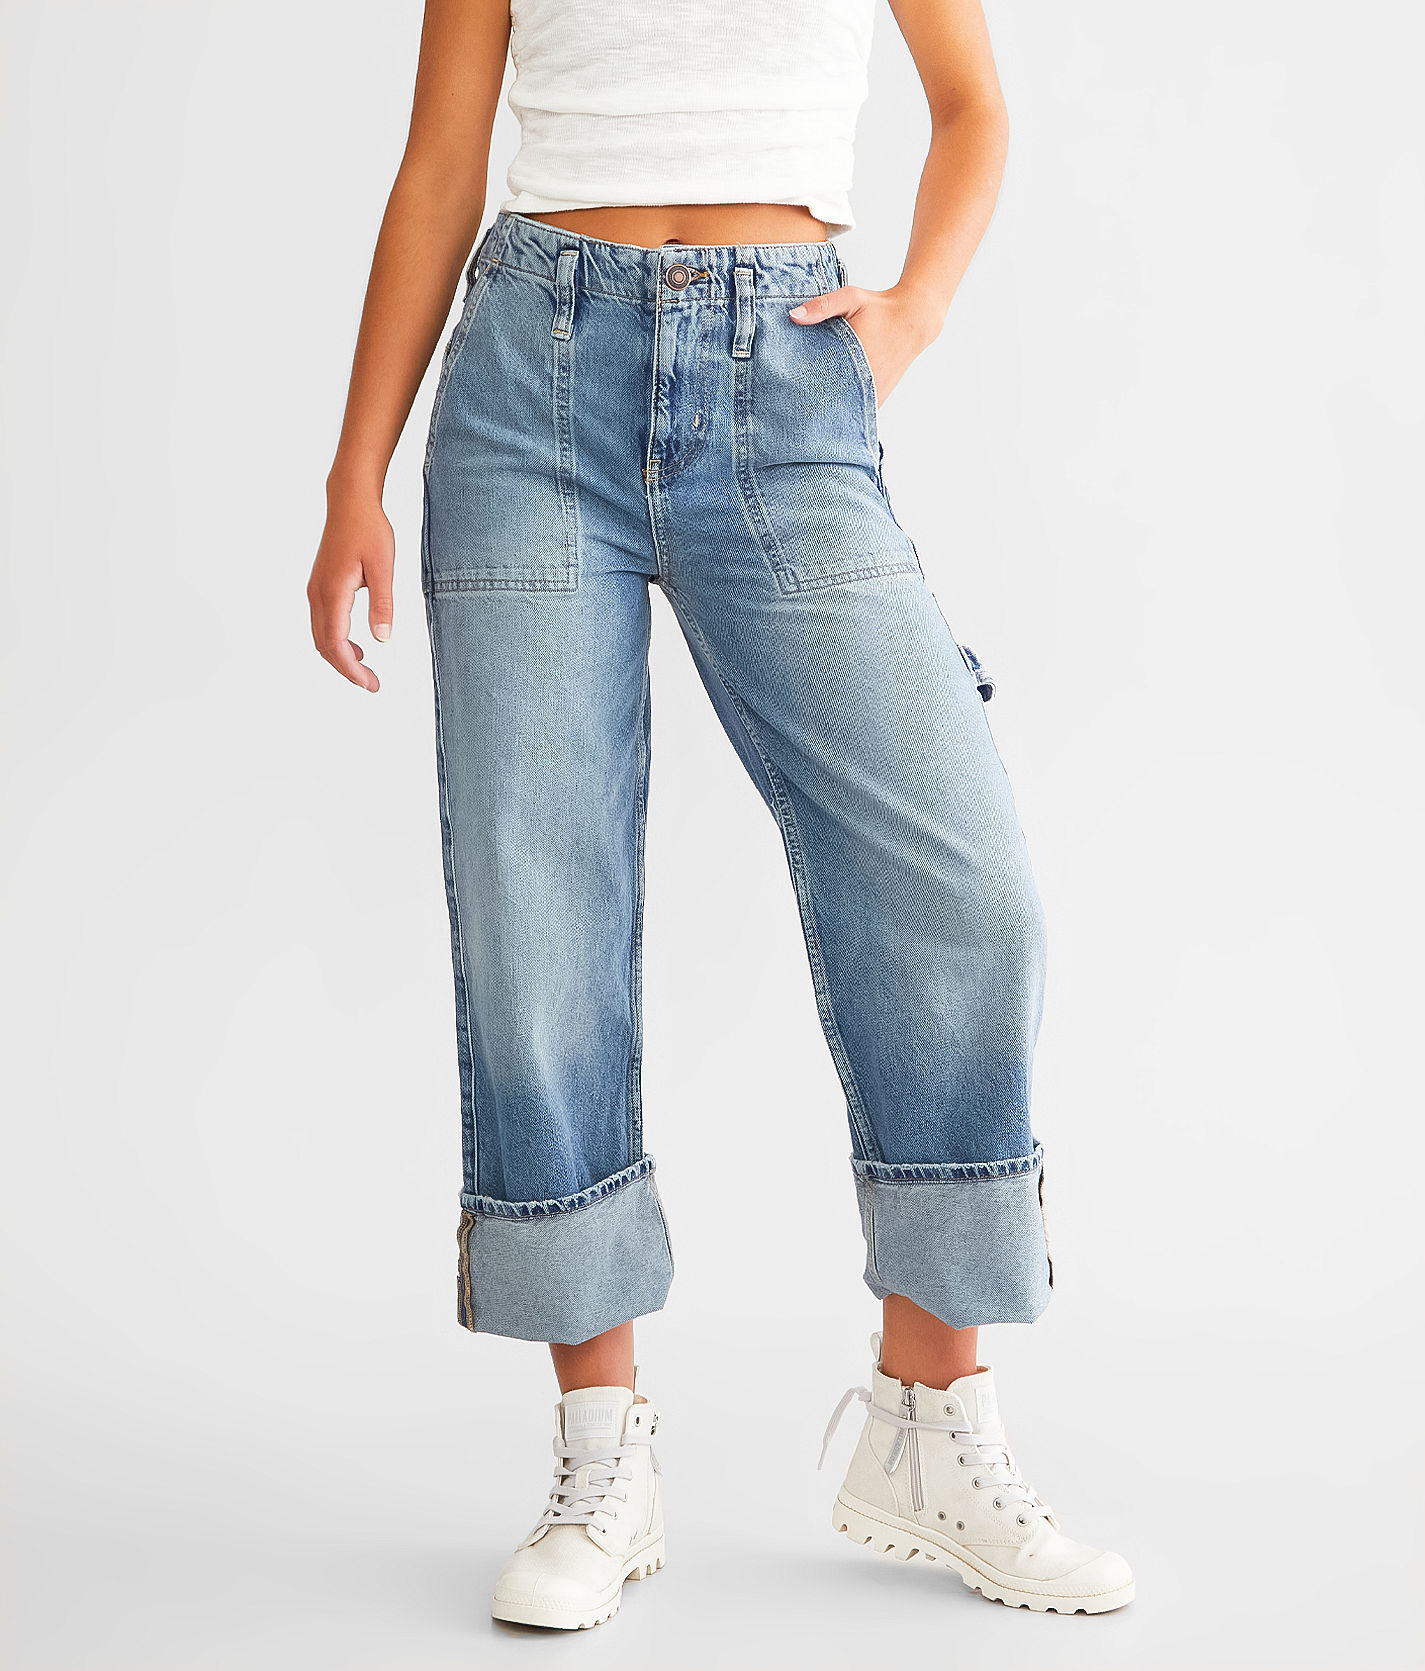 Free People Major Leagues Cuffed Cropped Jean  - female - Size: 25x29;X-Short